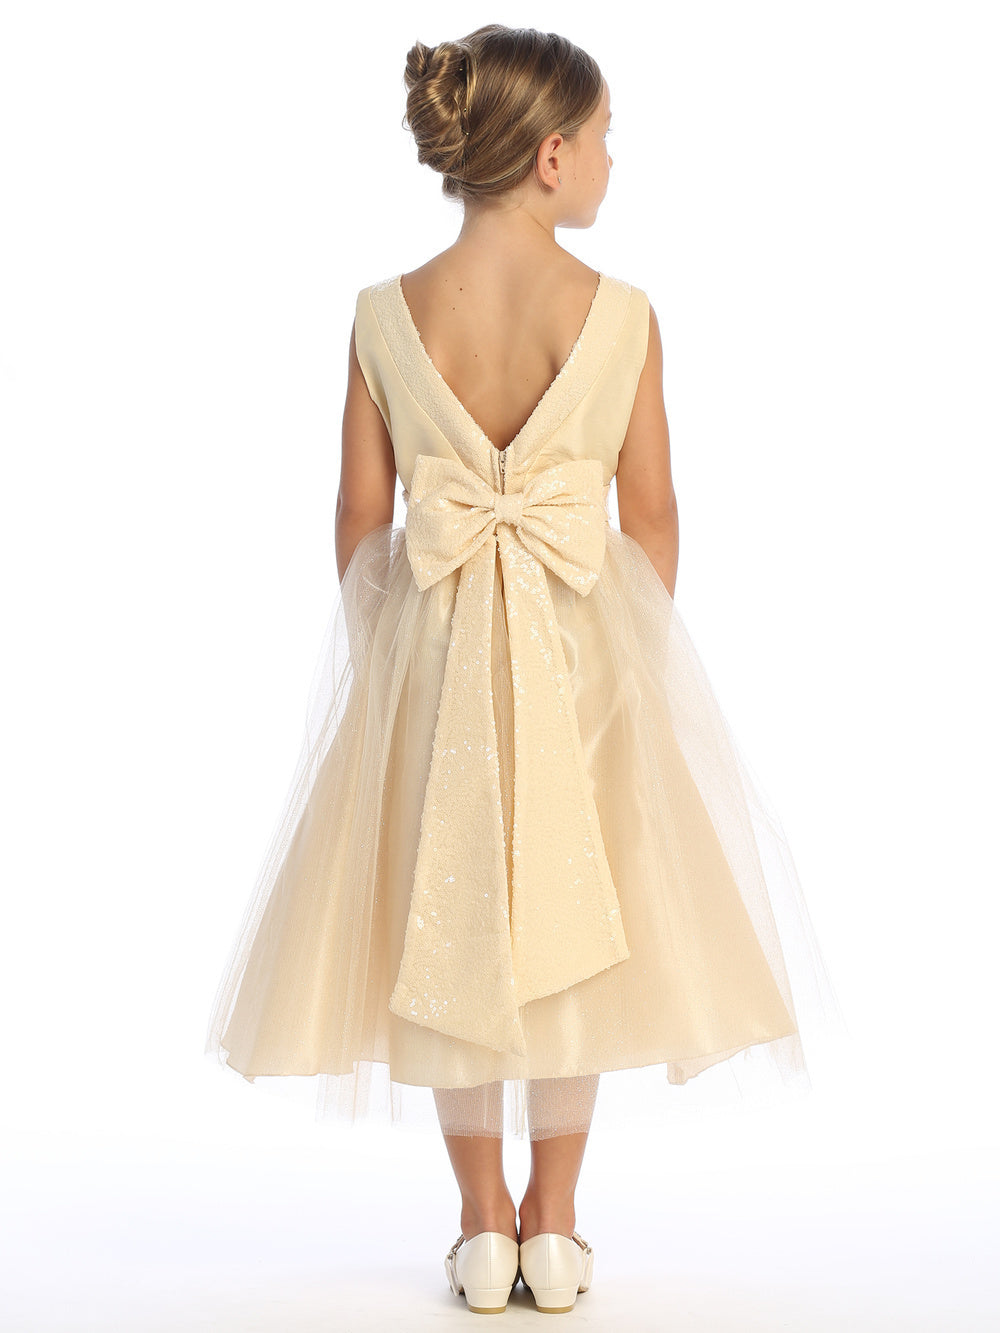 Champagne Flower Girl Dress with Shantung & Sparkle Tulle